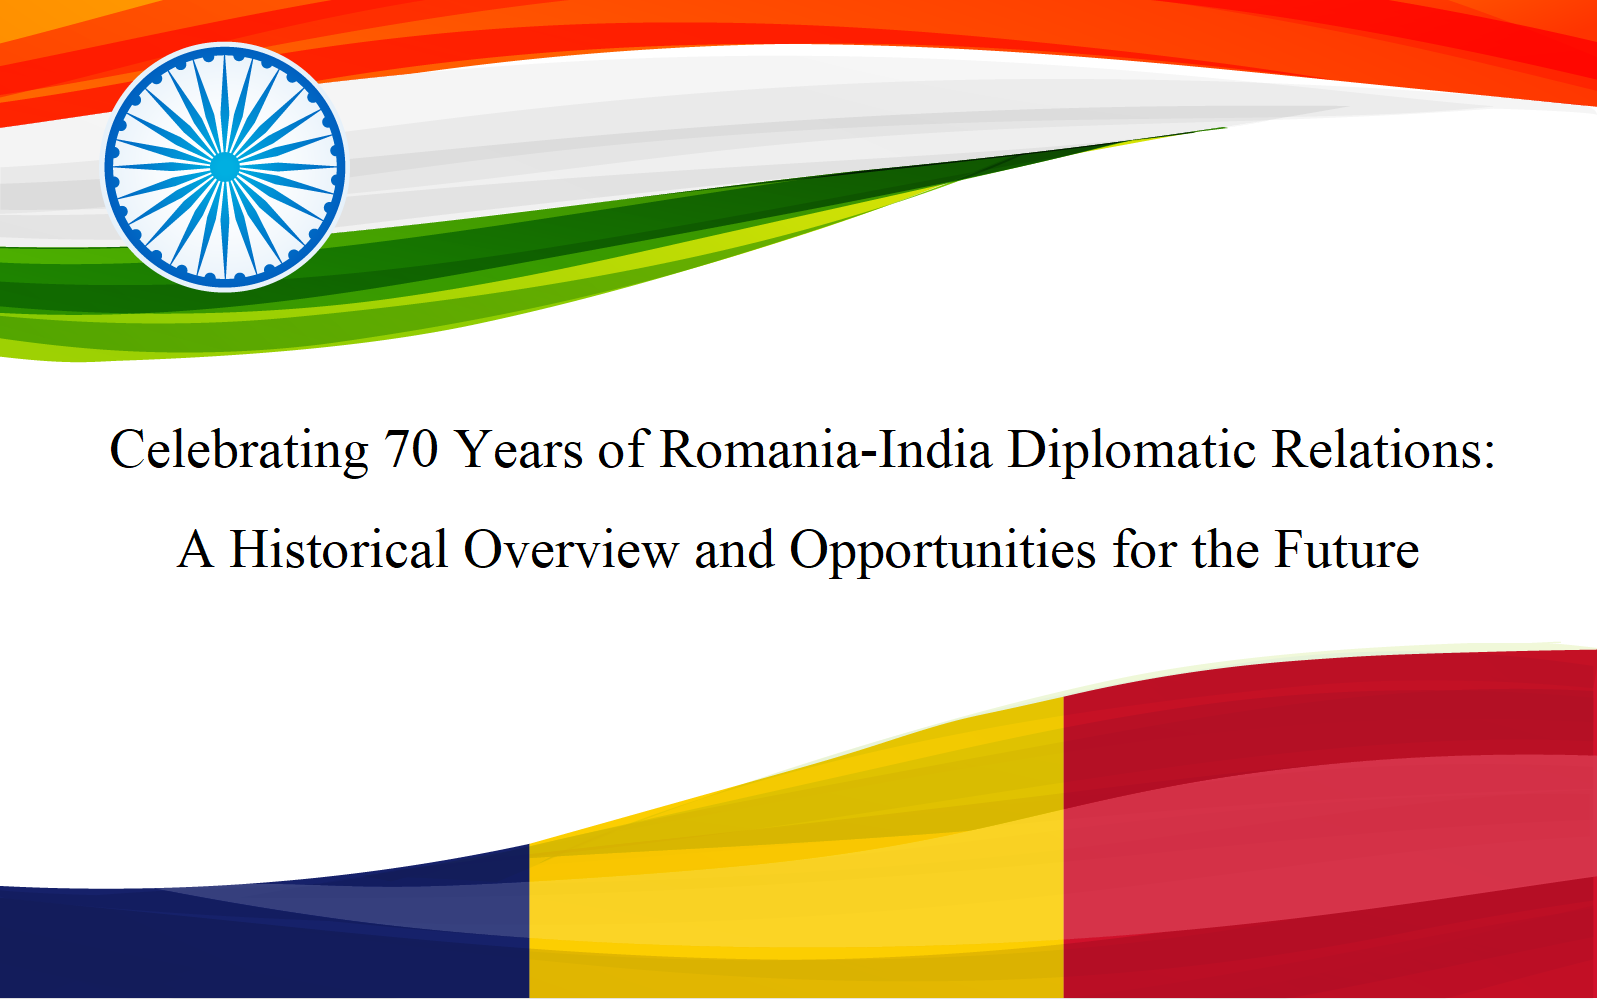 Conference: 70 Years of Romania-India Diplomatic Relations